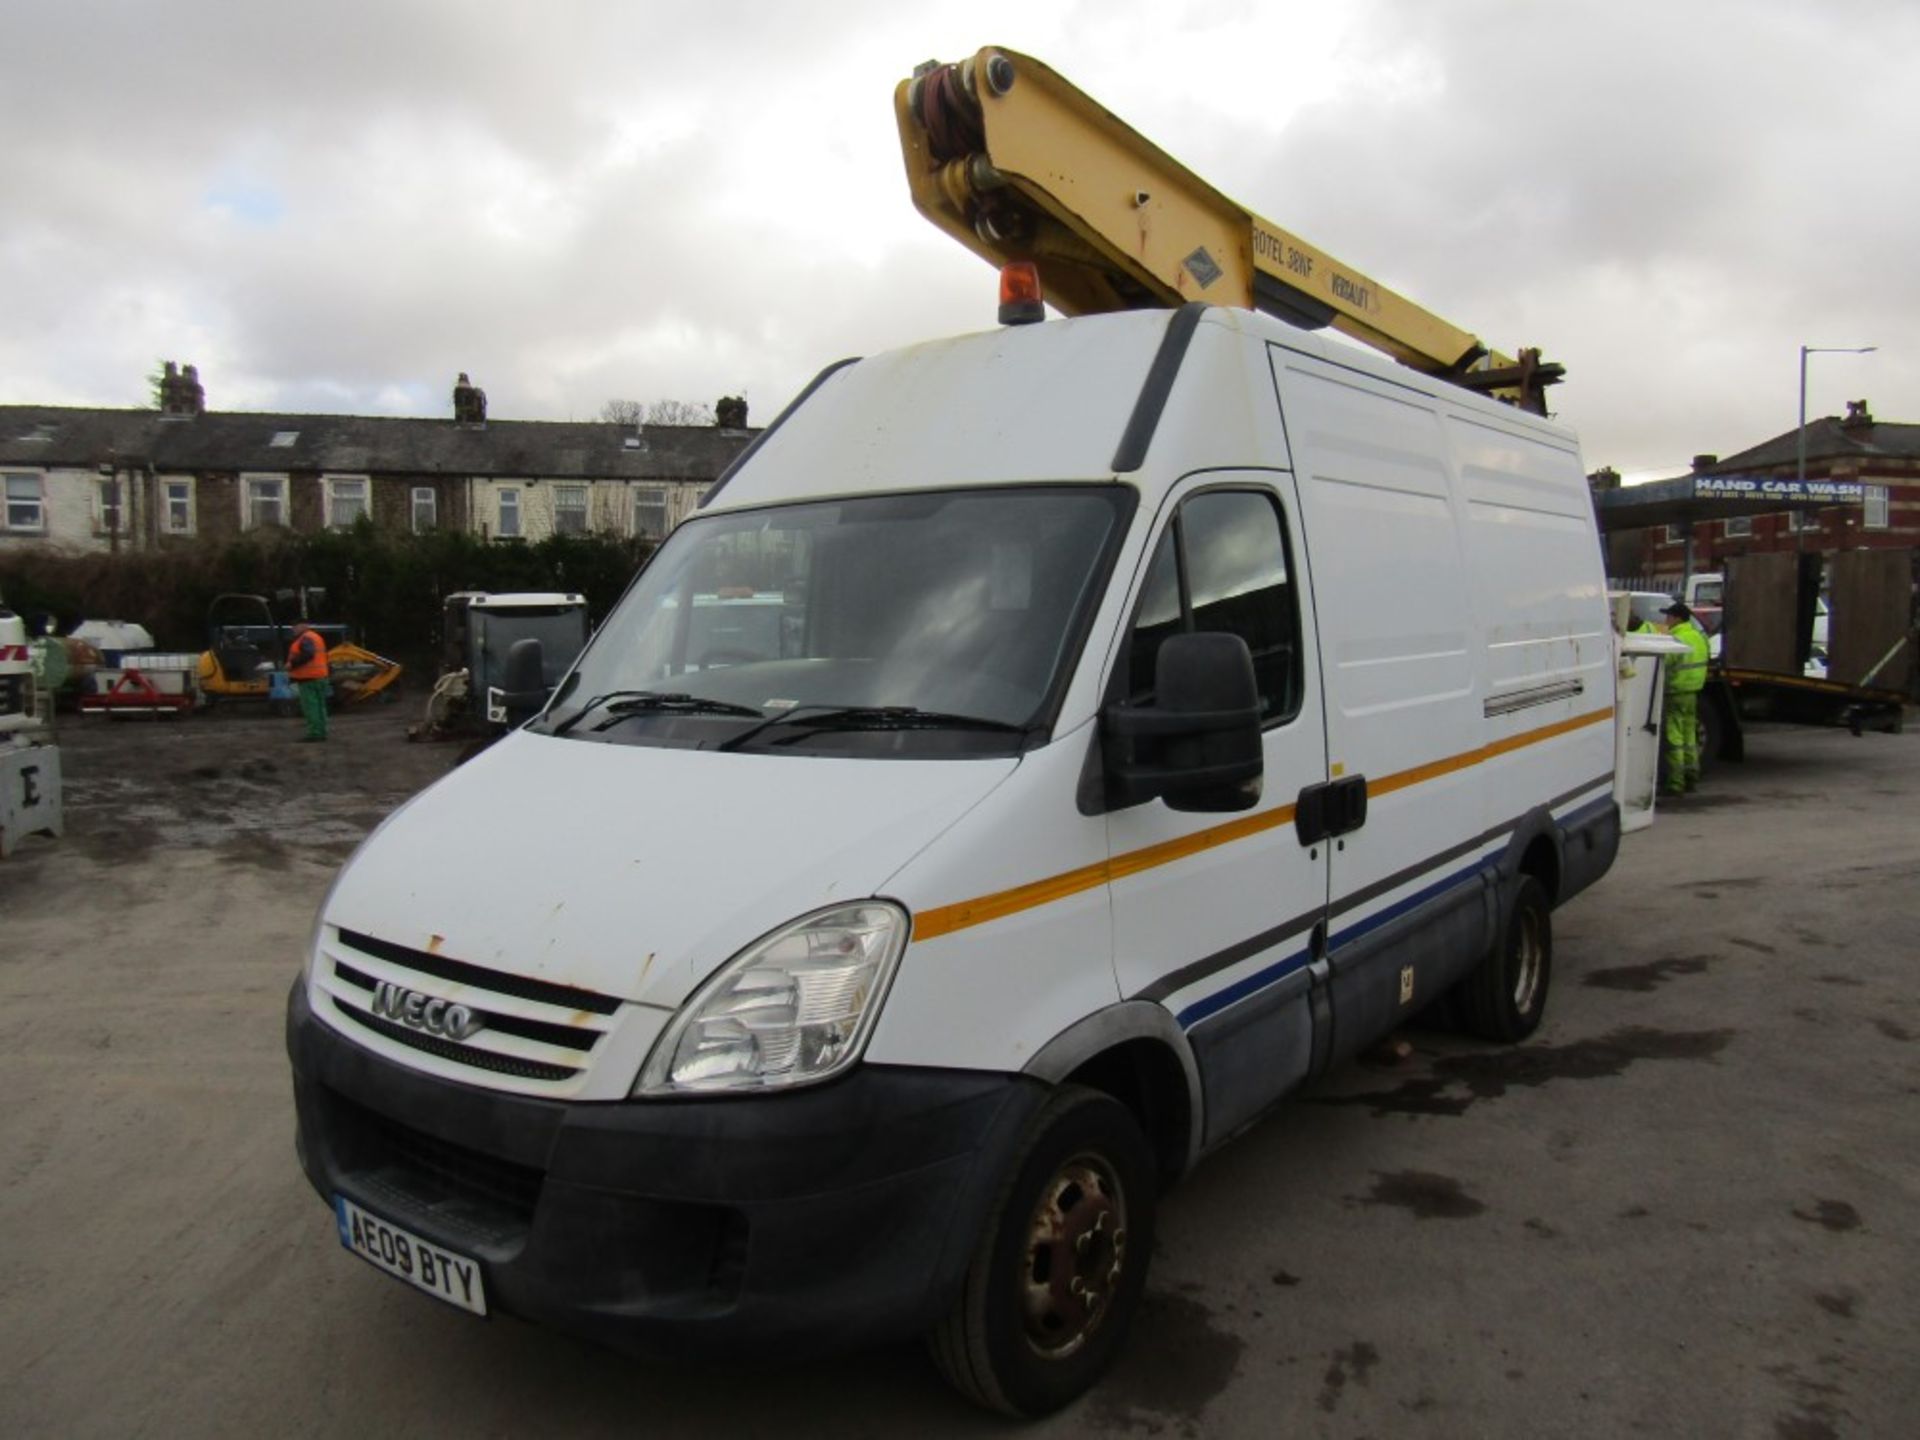 09 reg IVECO DAILY 50C15 CHERRY PICKER, 1ST REG 03/09, 149984M NOT WARRANTED, V5 HERE, 2 FORMER - Image 2 of 7